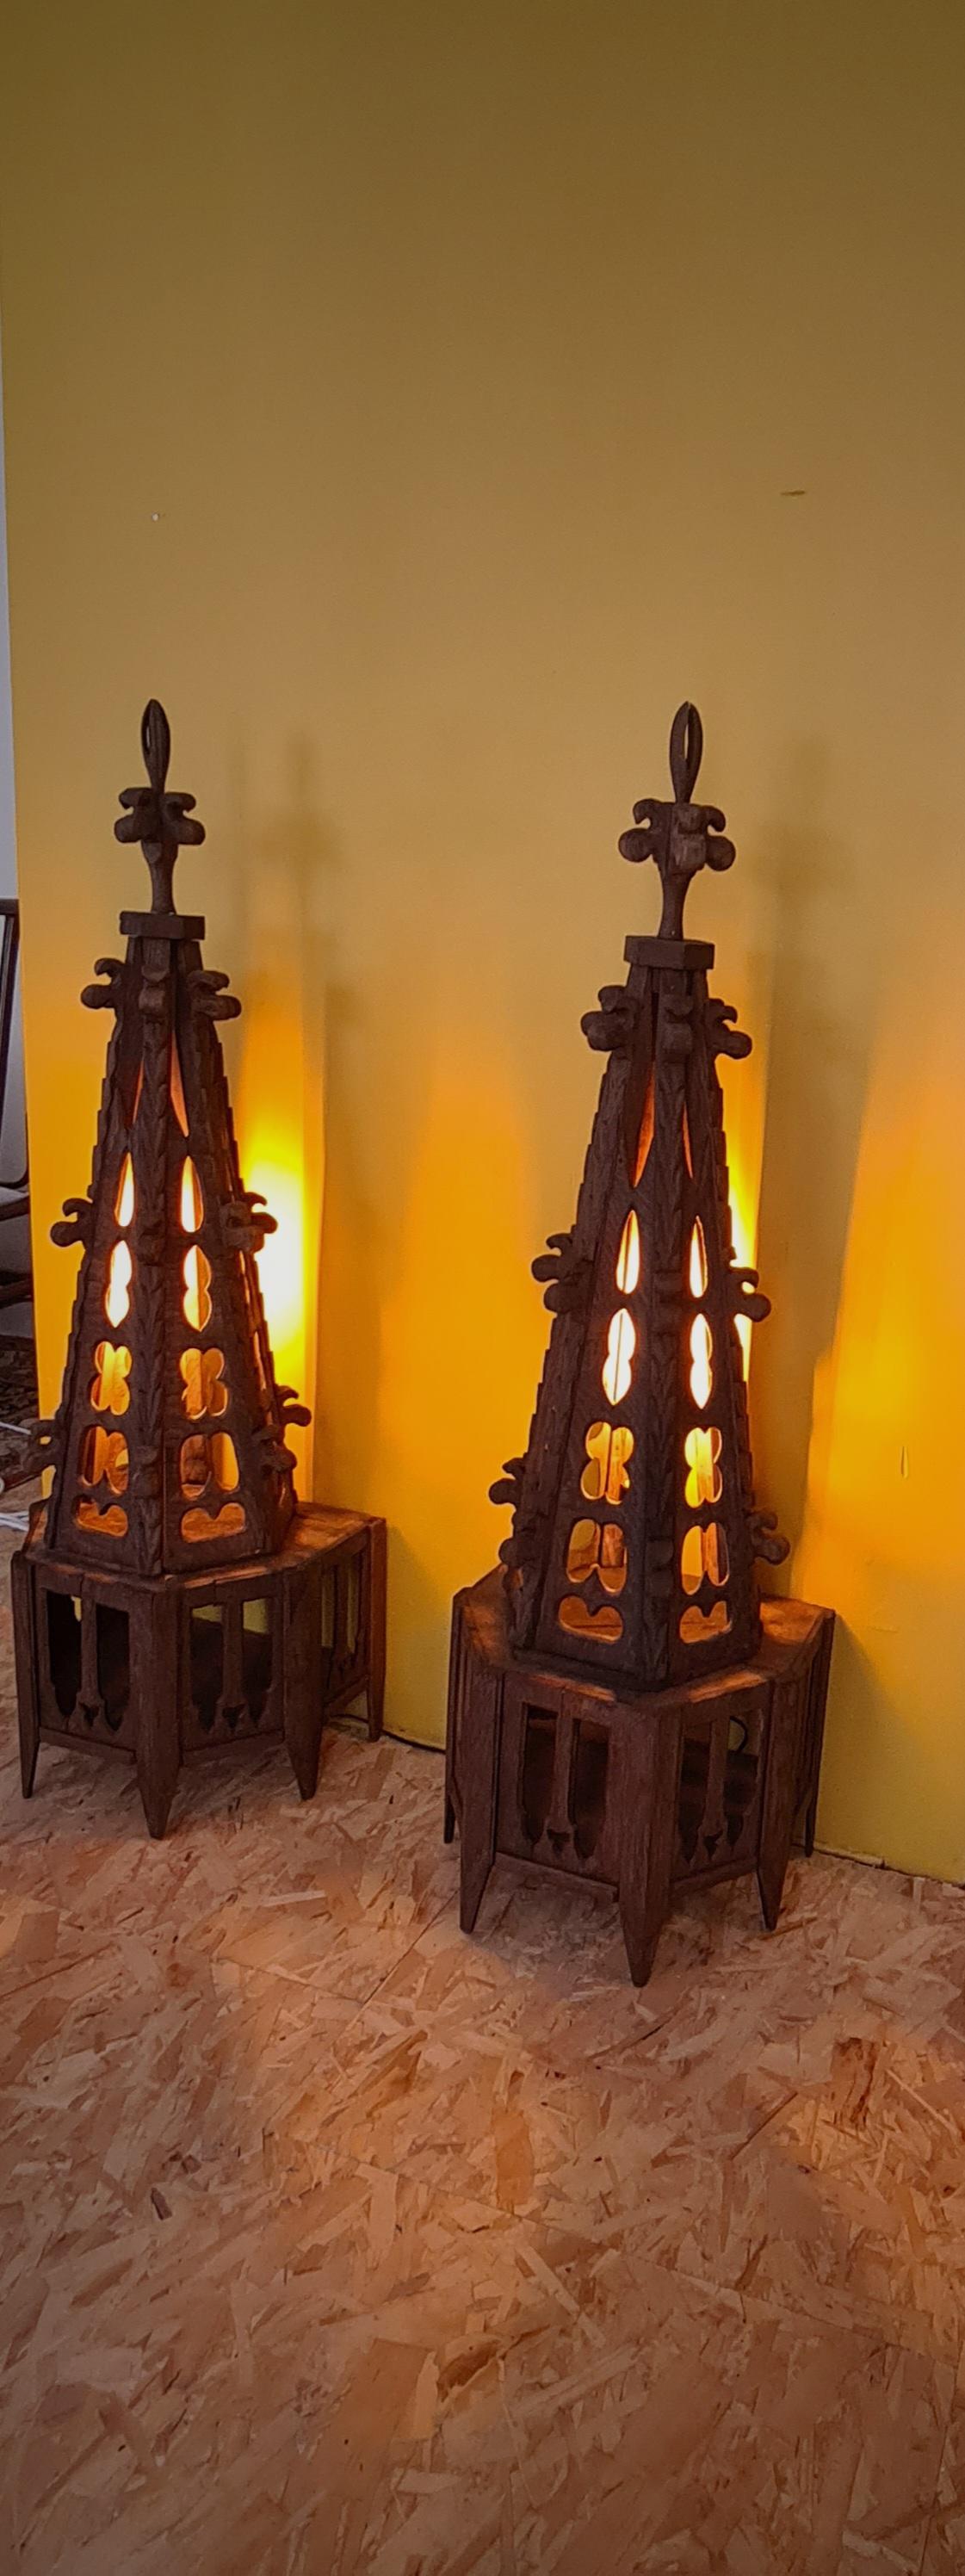 French Element of church decoration, Pinnacle transformed into a lamp